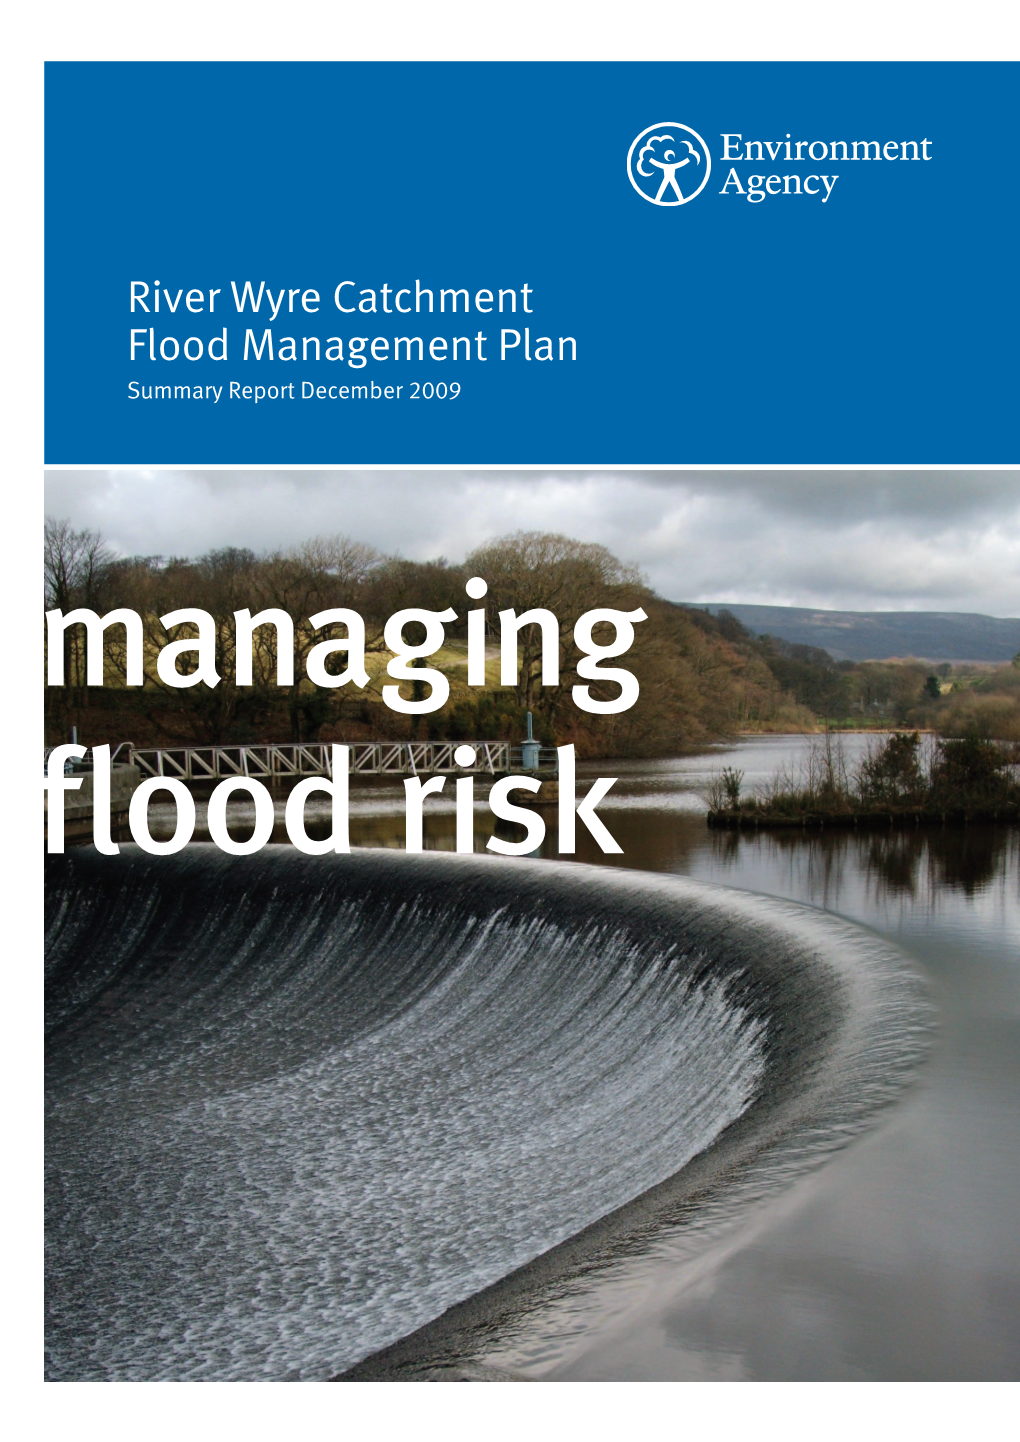 River Wyre Catchment Flood Management Plan Summary Report December 2009 Managing Flood Risk We Are the Environment Agency